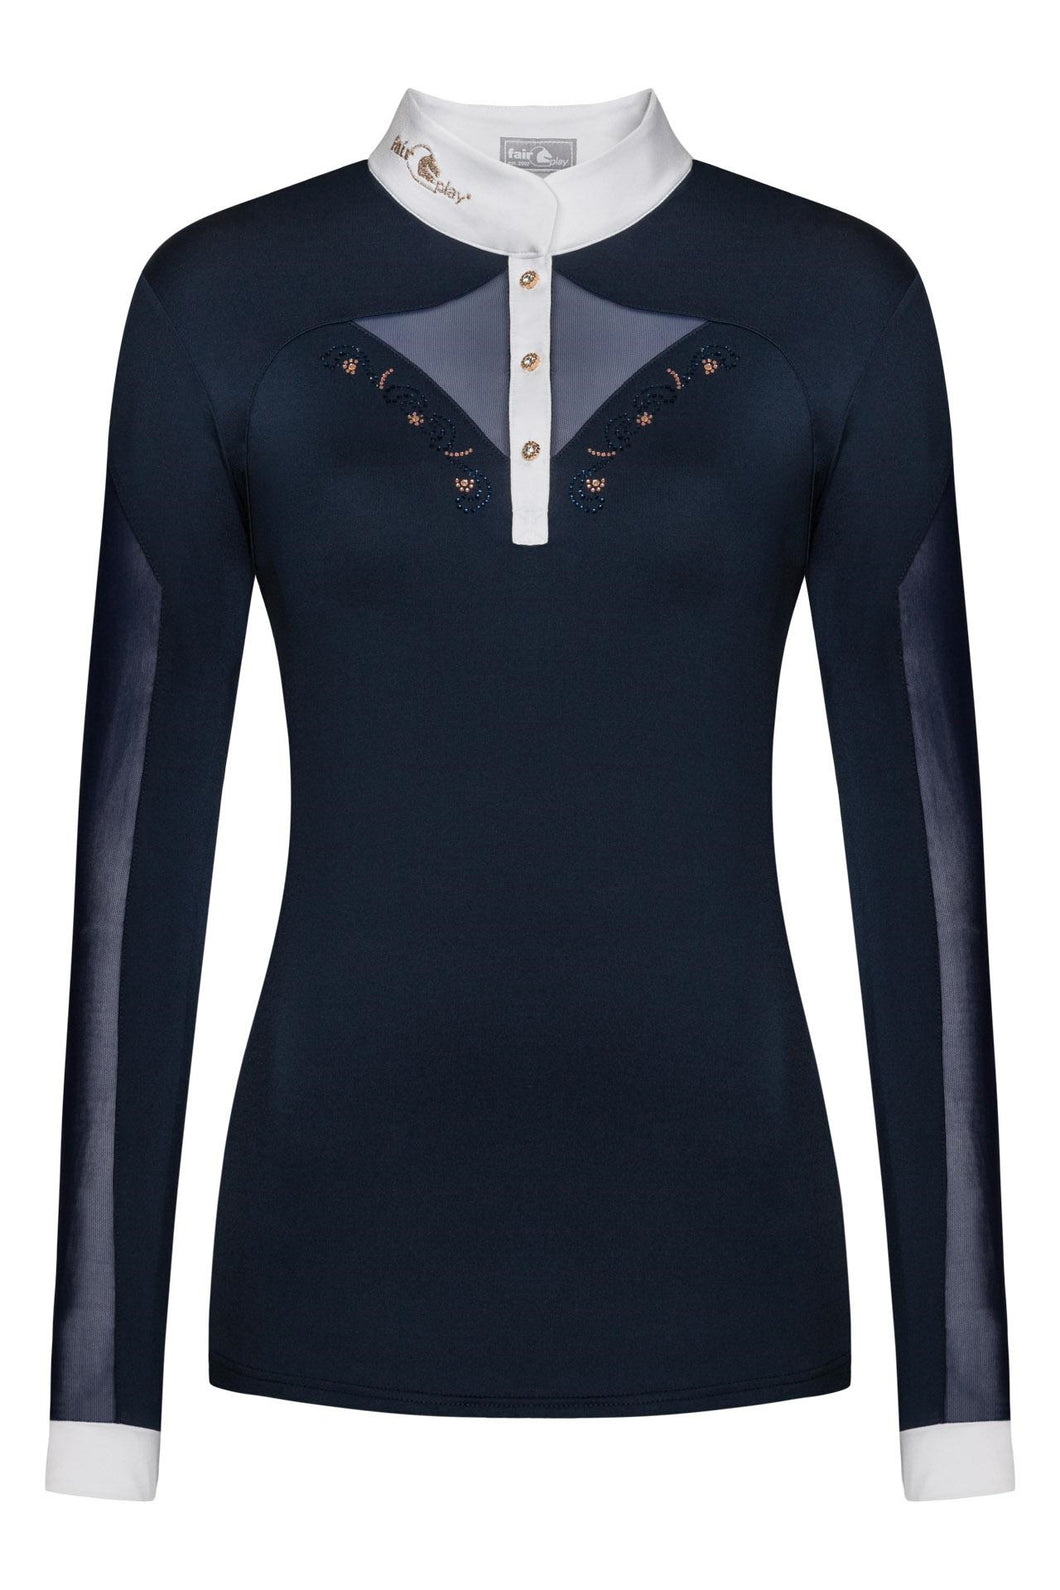 Fair Play Competition Shirt CATHRINE ROSEGOLD LS, Navy-White